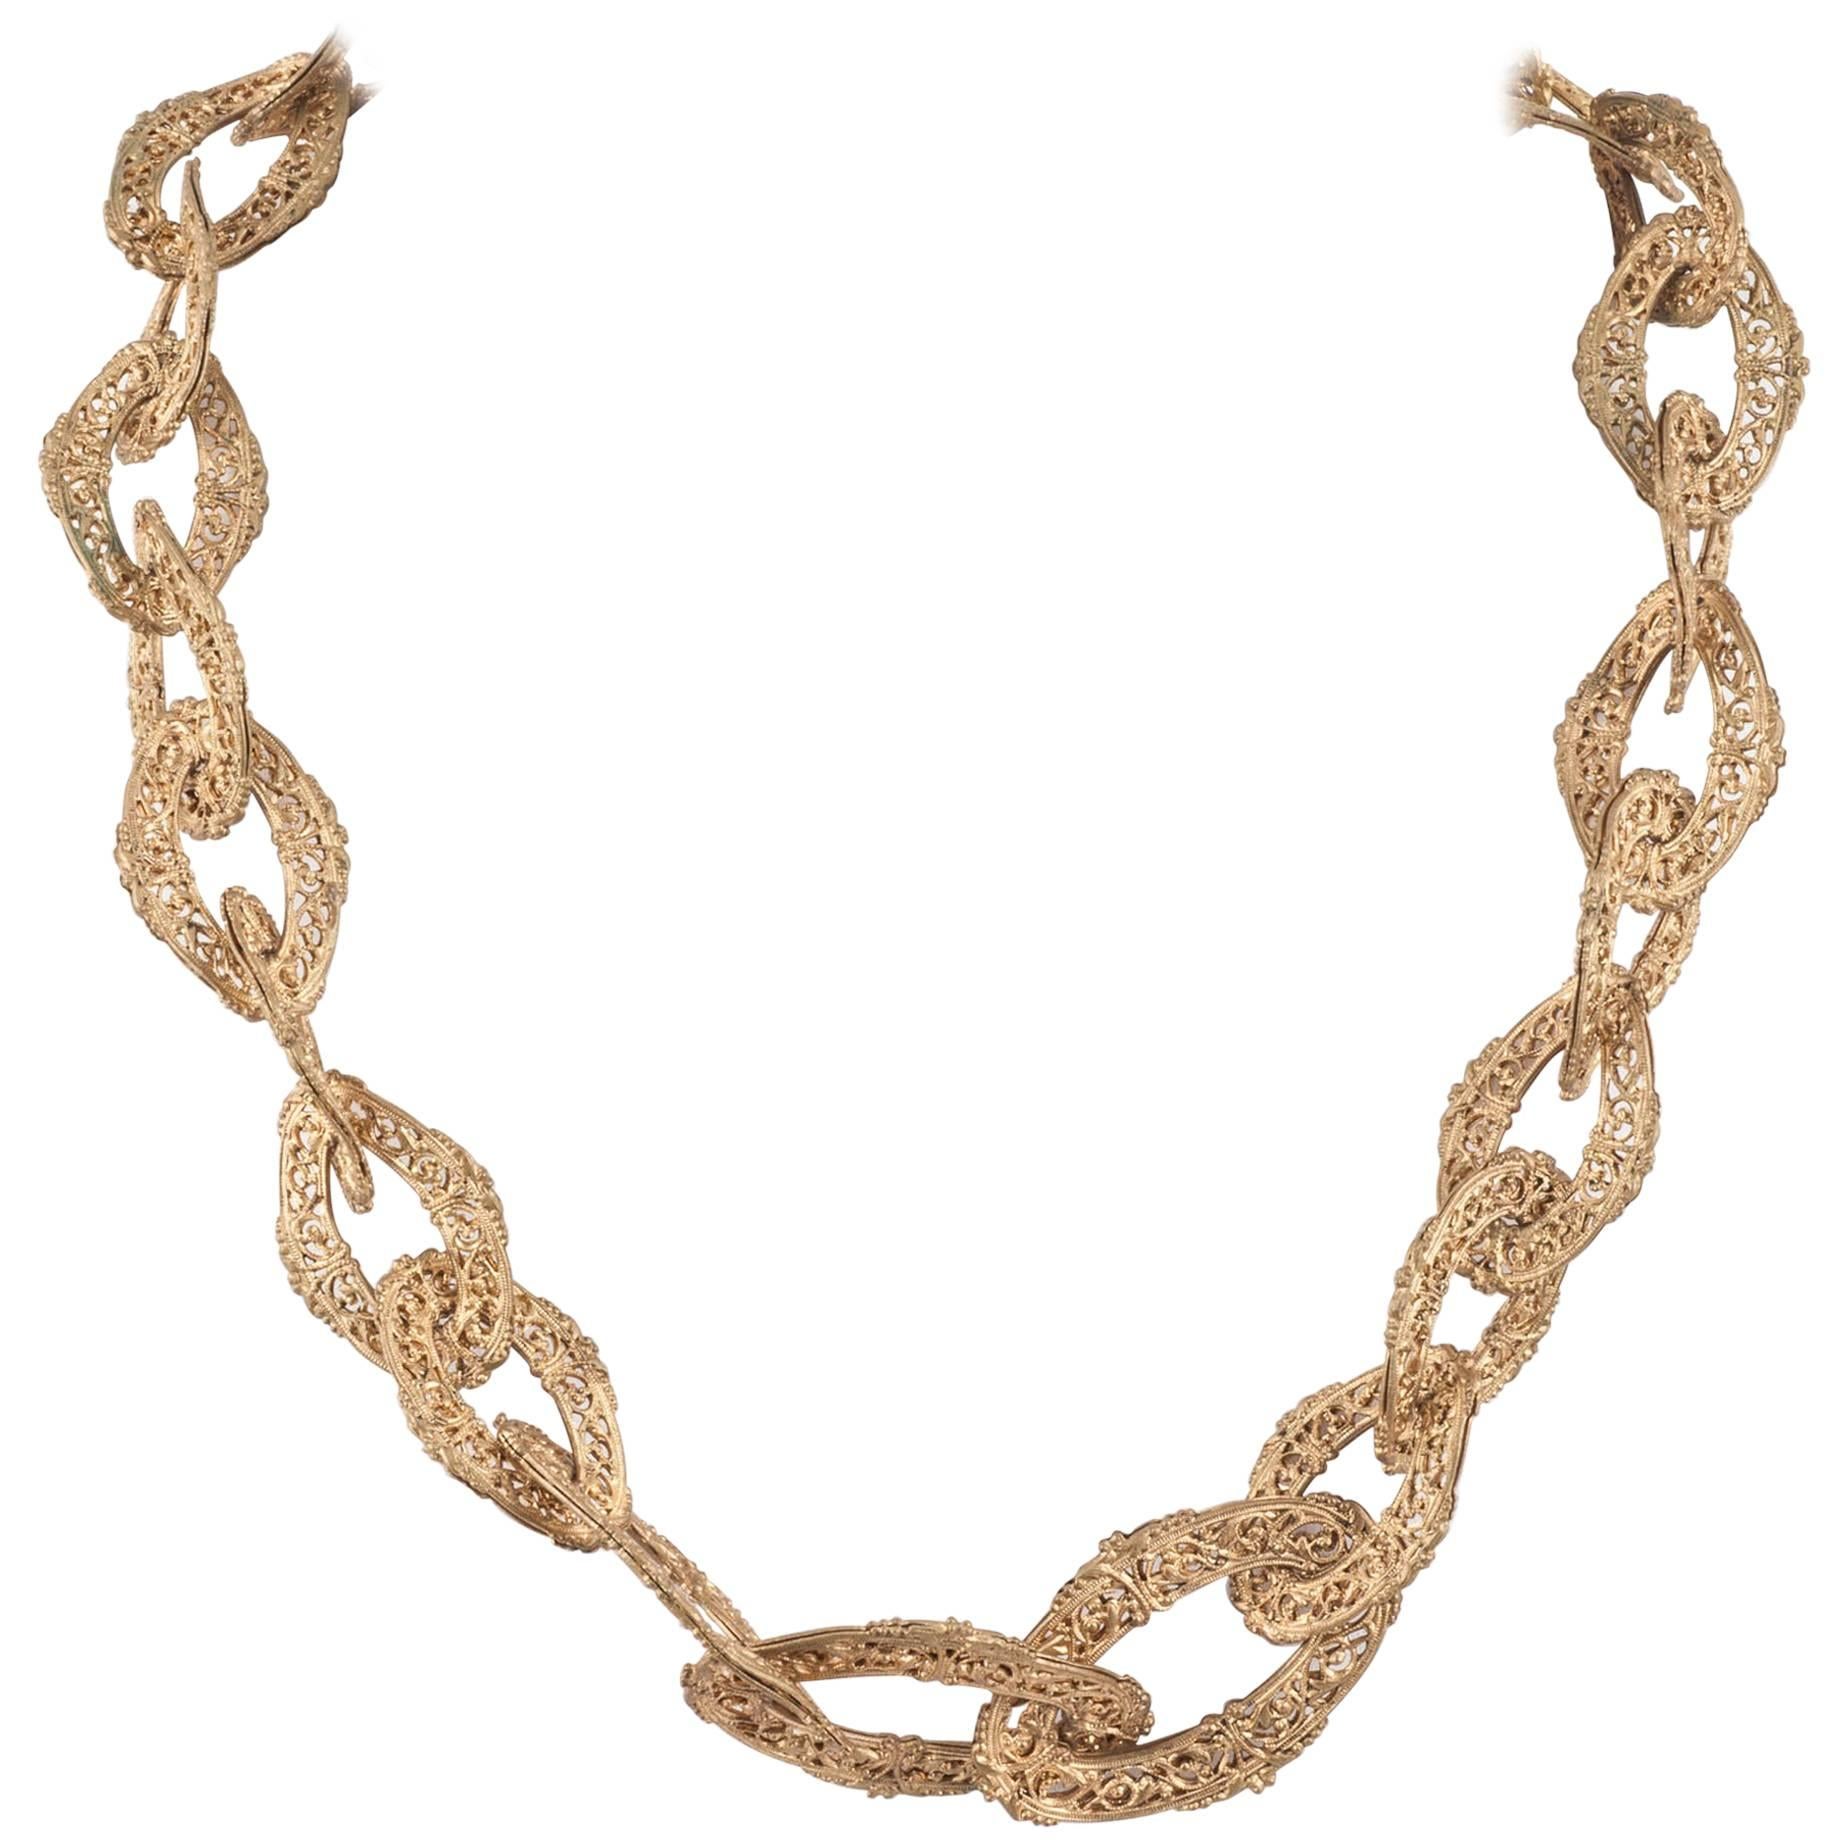 A large antiqued gold filigree link chain necklace, Goossens for Chanel, 1960s.